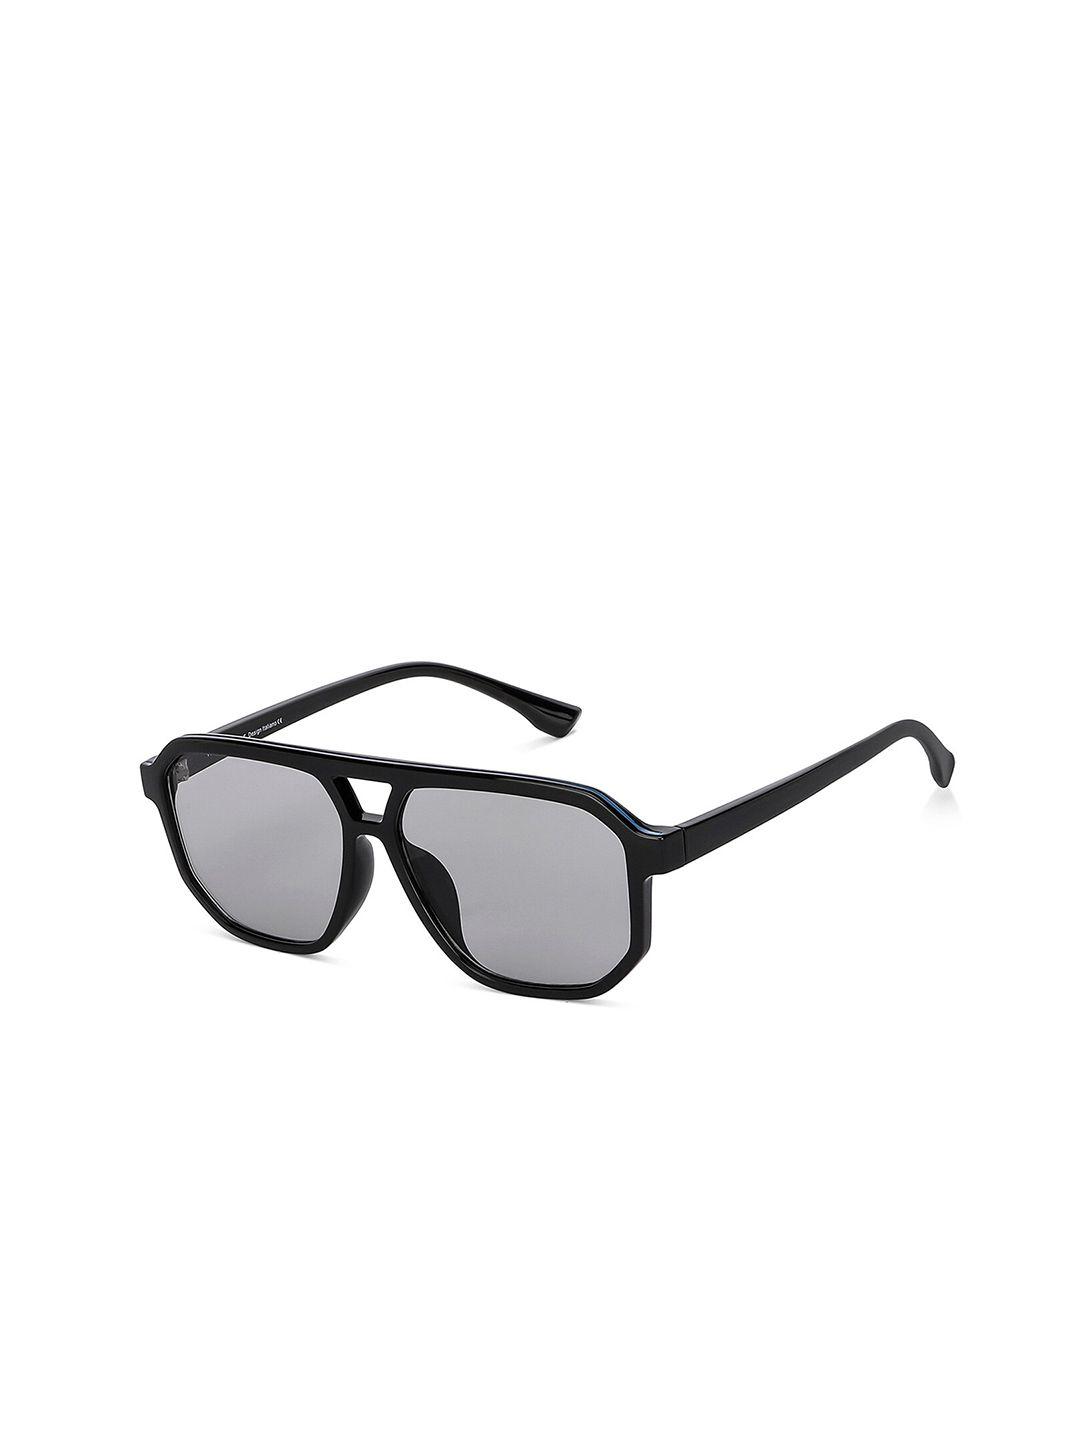 vincent chase unisex grey lens & black other sunglasses with uv protected lens